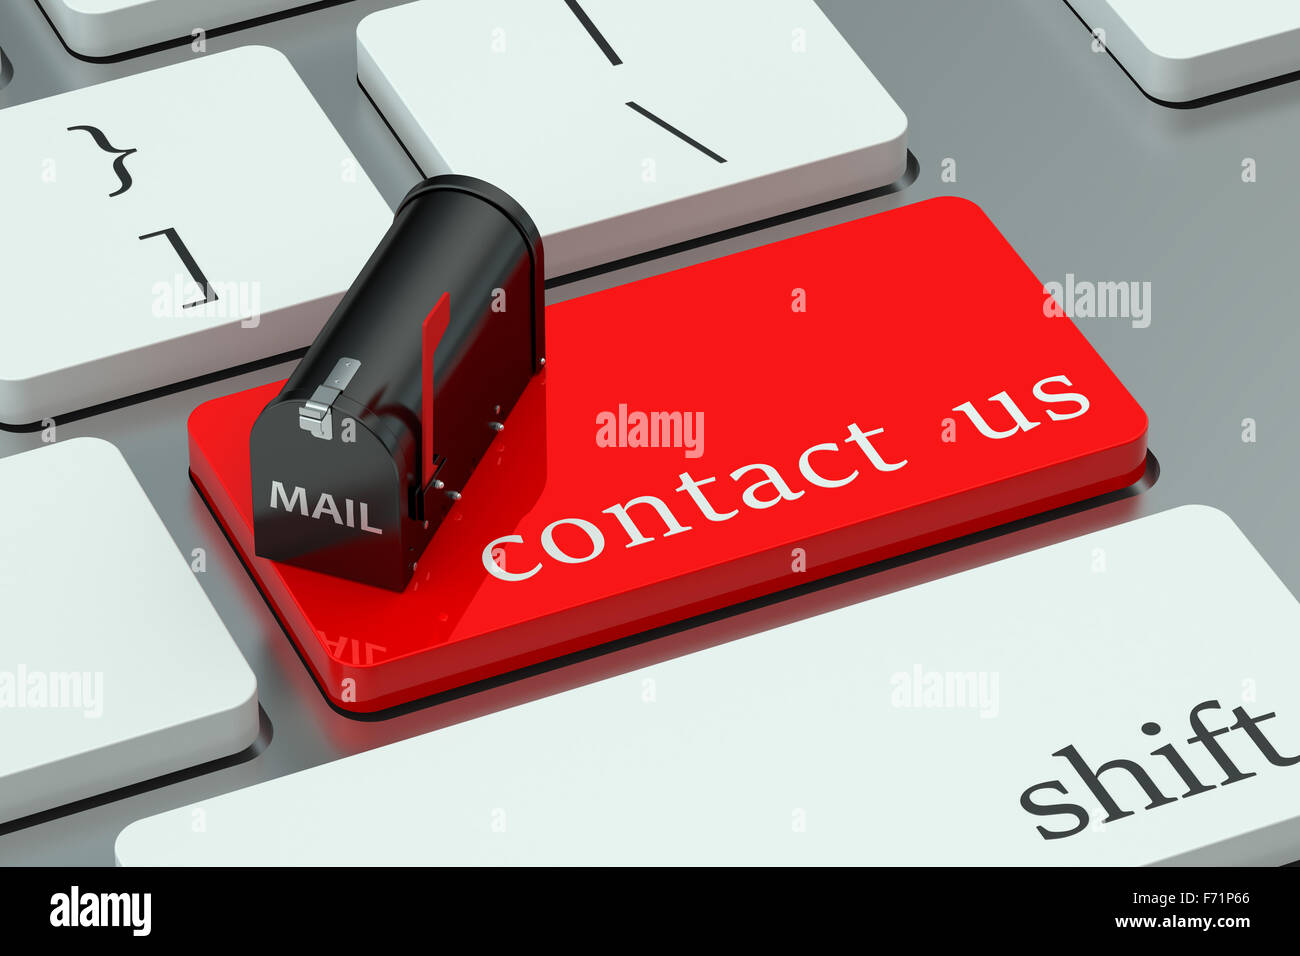 Contact us, red hot key on the keyboard Stock Photo